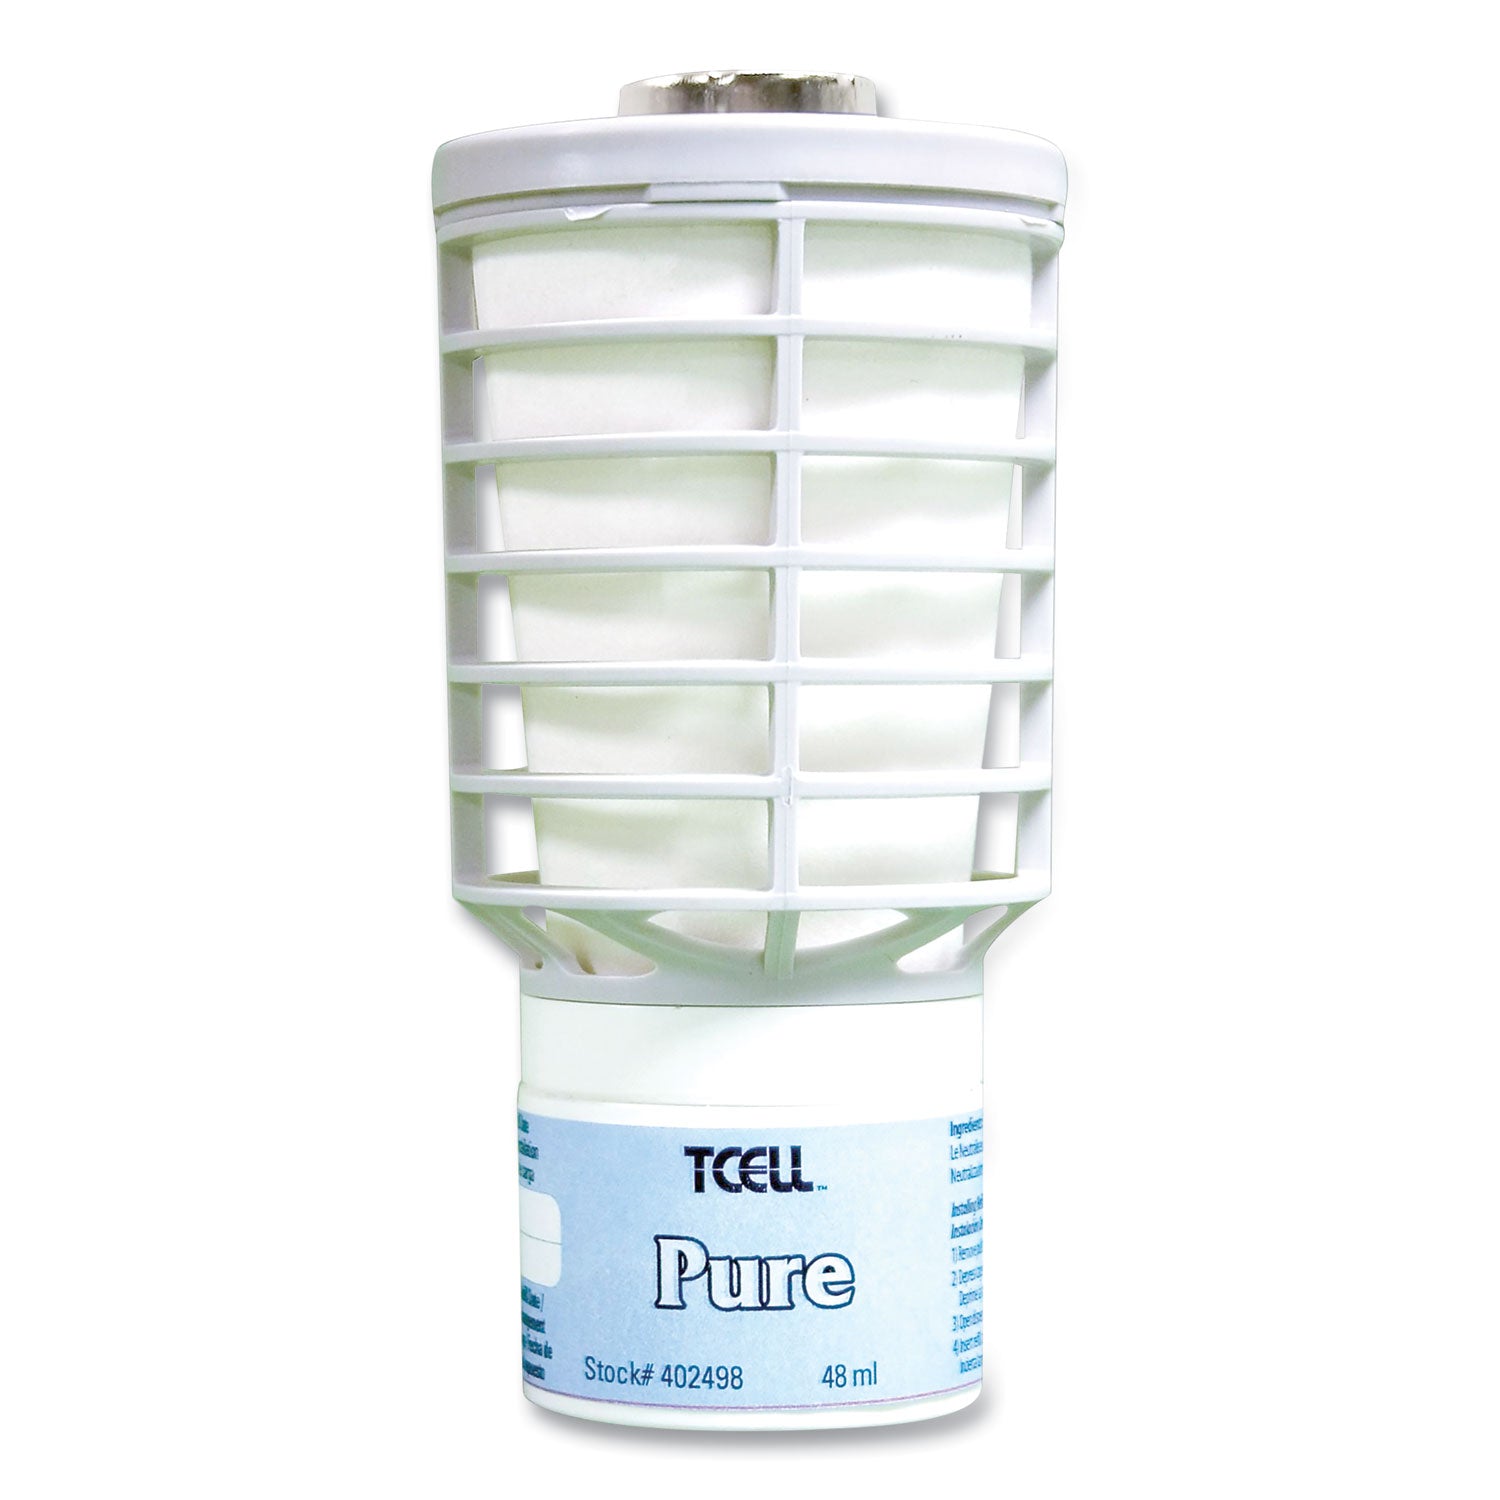 tcell-air-freshener-dispenser-oil-fragrance-refill-pure-scent-162-oz-6-carton_rcp402498 - 1